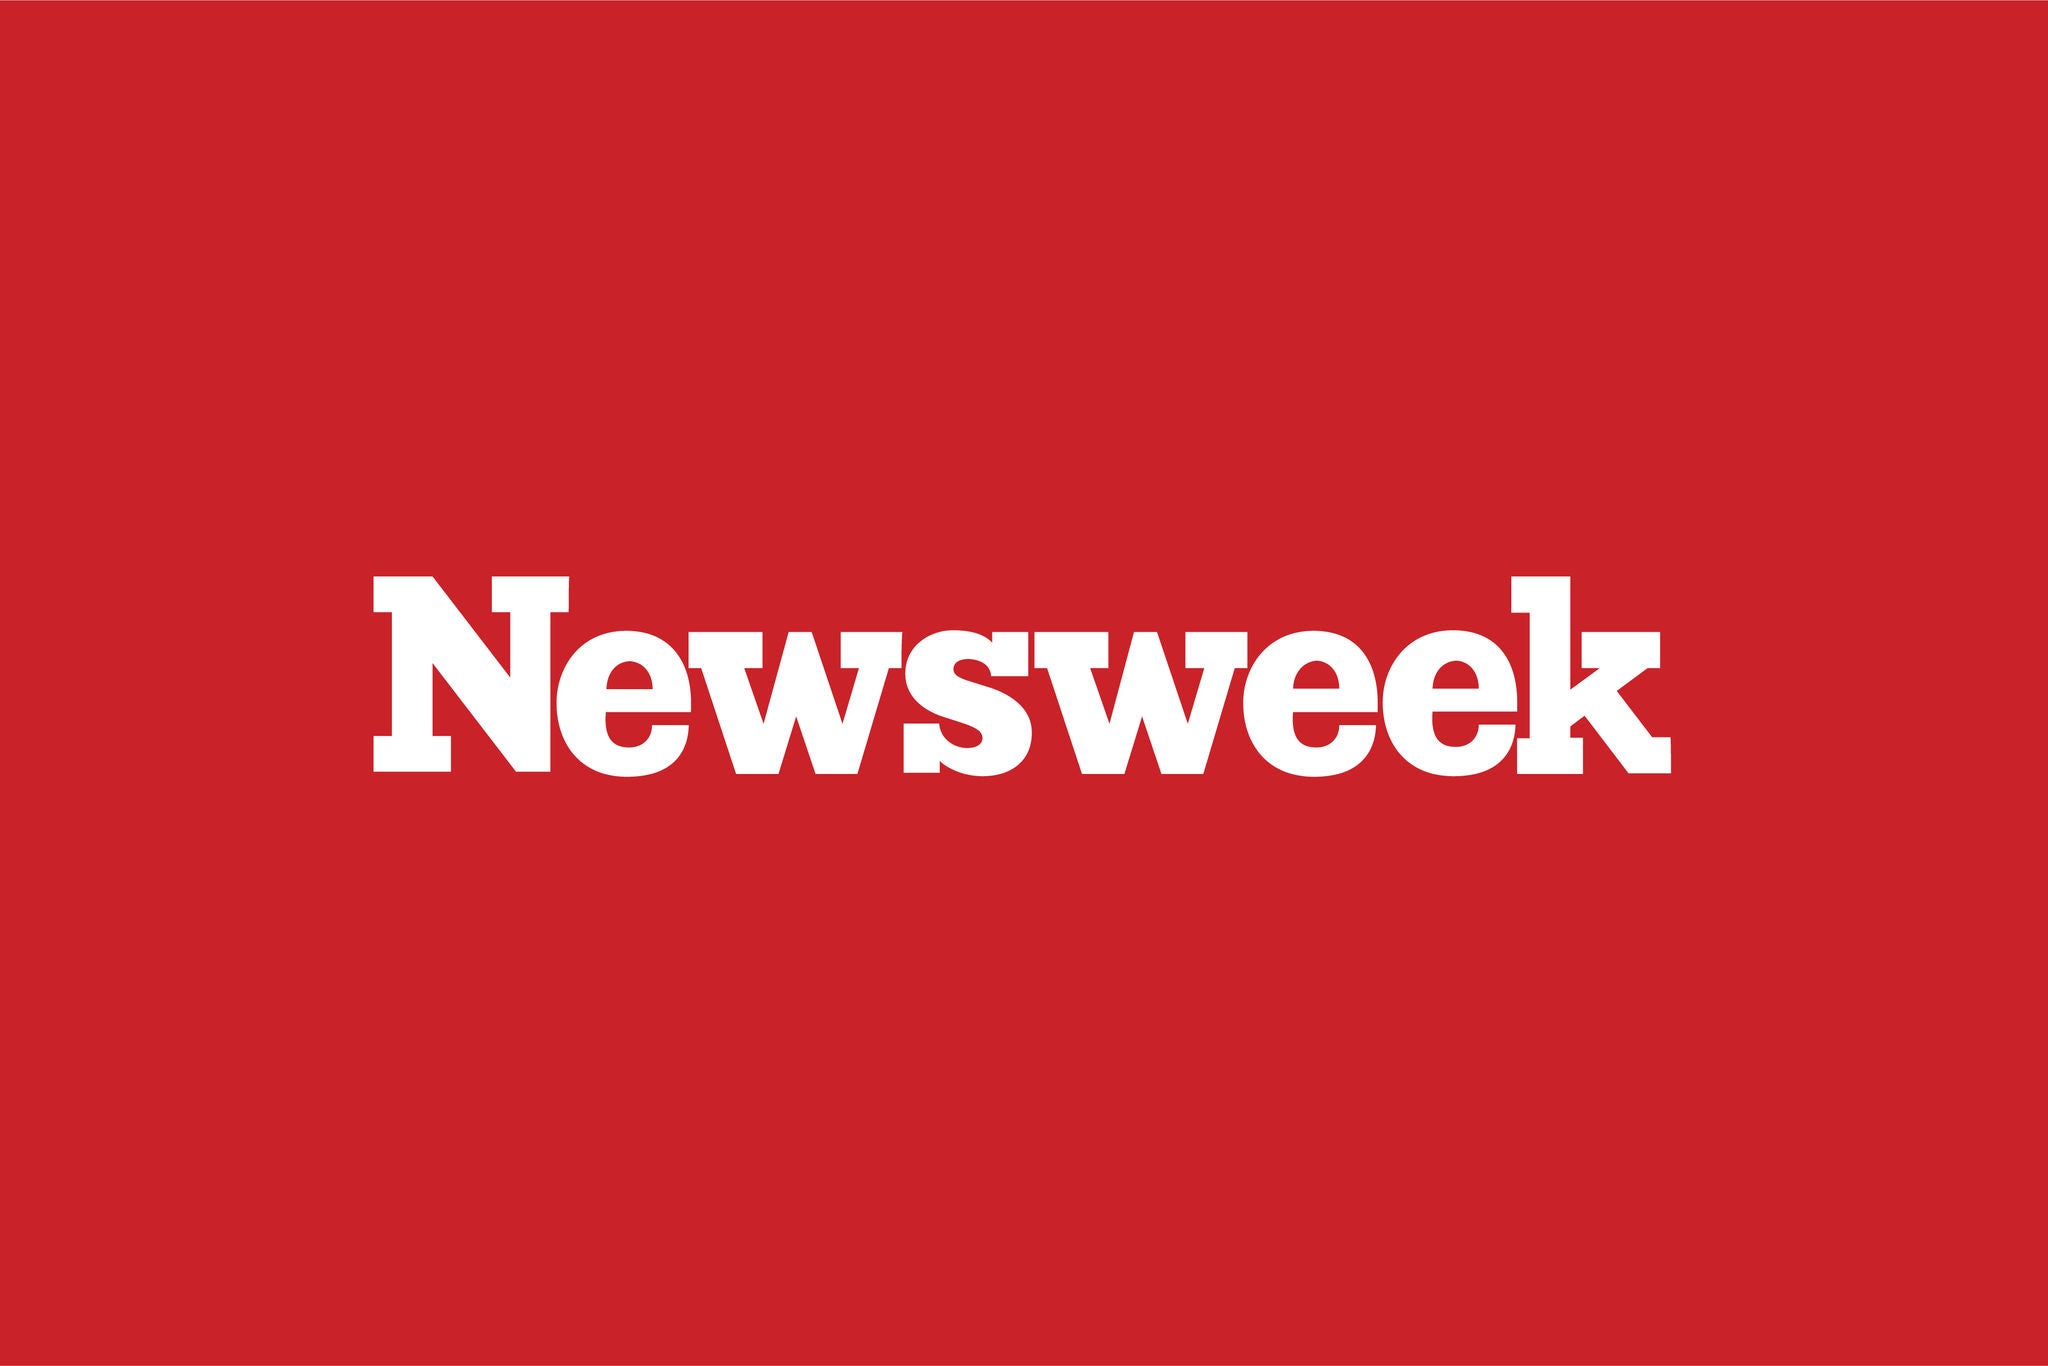 White Newsweek logo on a red square representing America’s Most Responsible Companies ranking